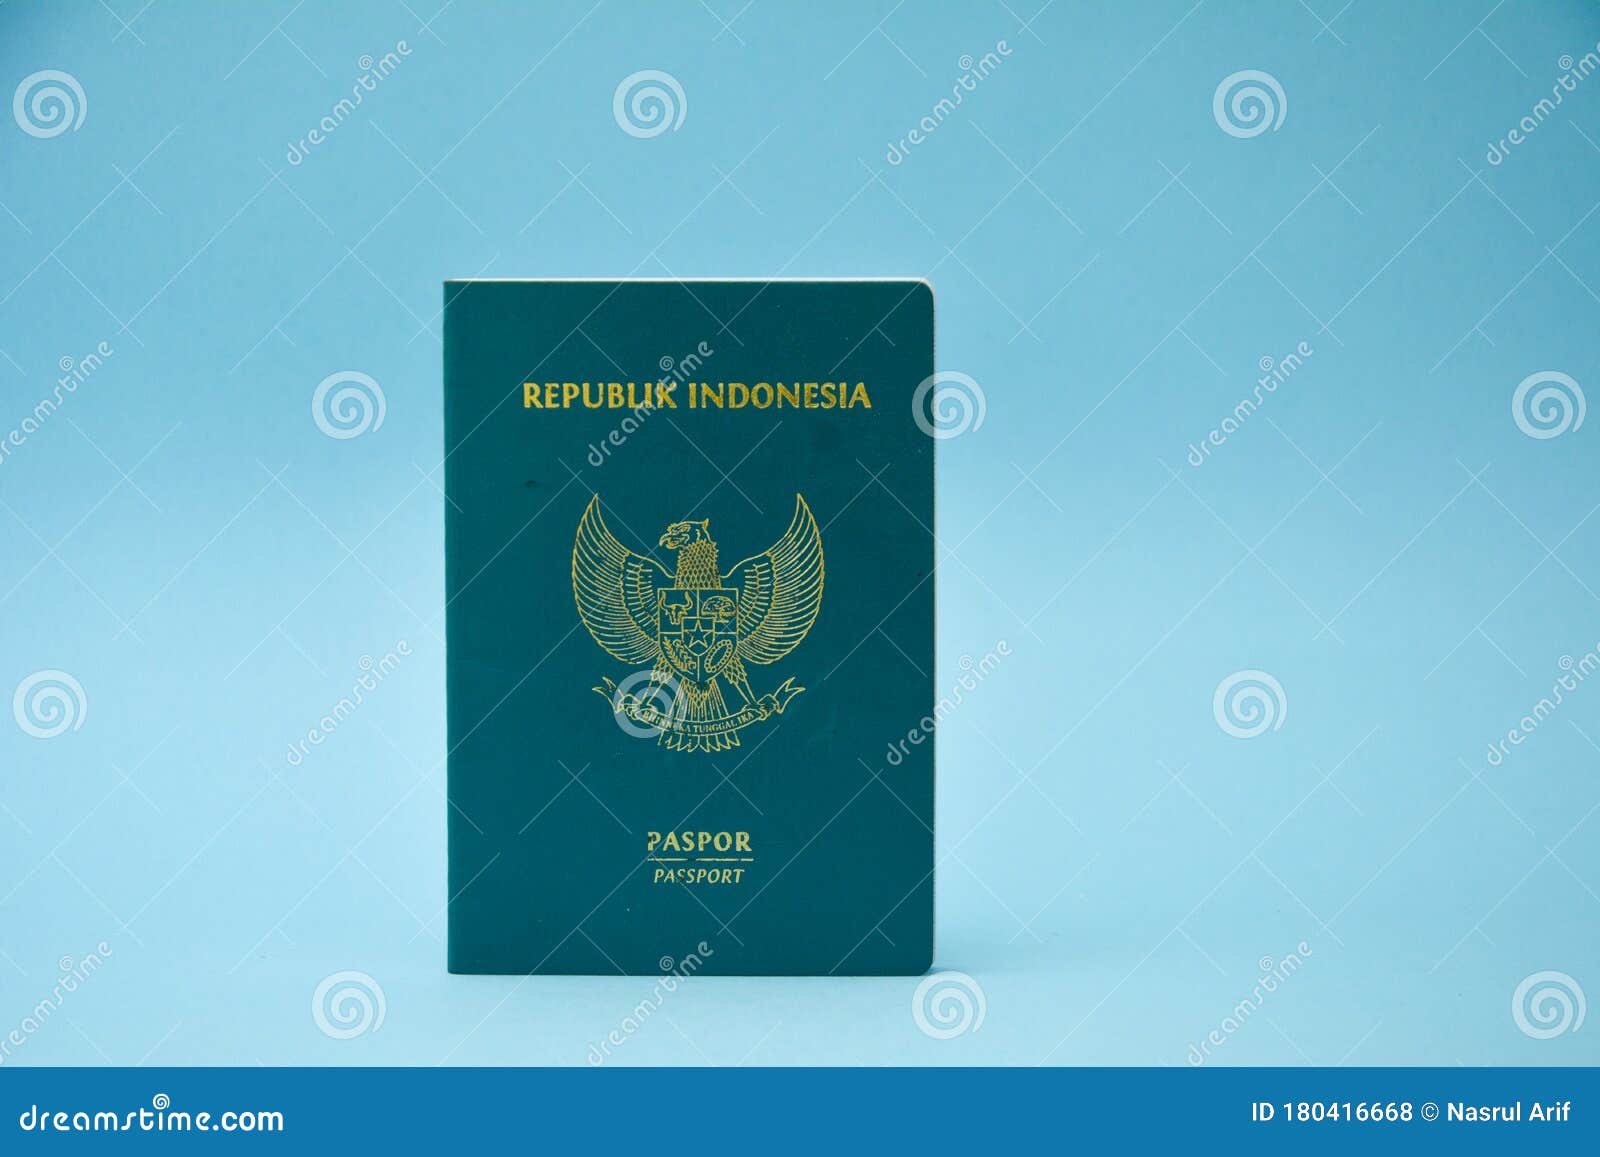 Photo of Indonesian Passport Concept with Beautiful Light Blue Color  Background Stock Photo - Image of cover, international: 180416668